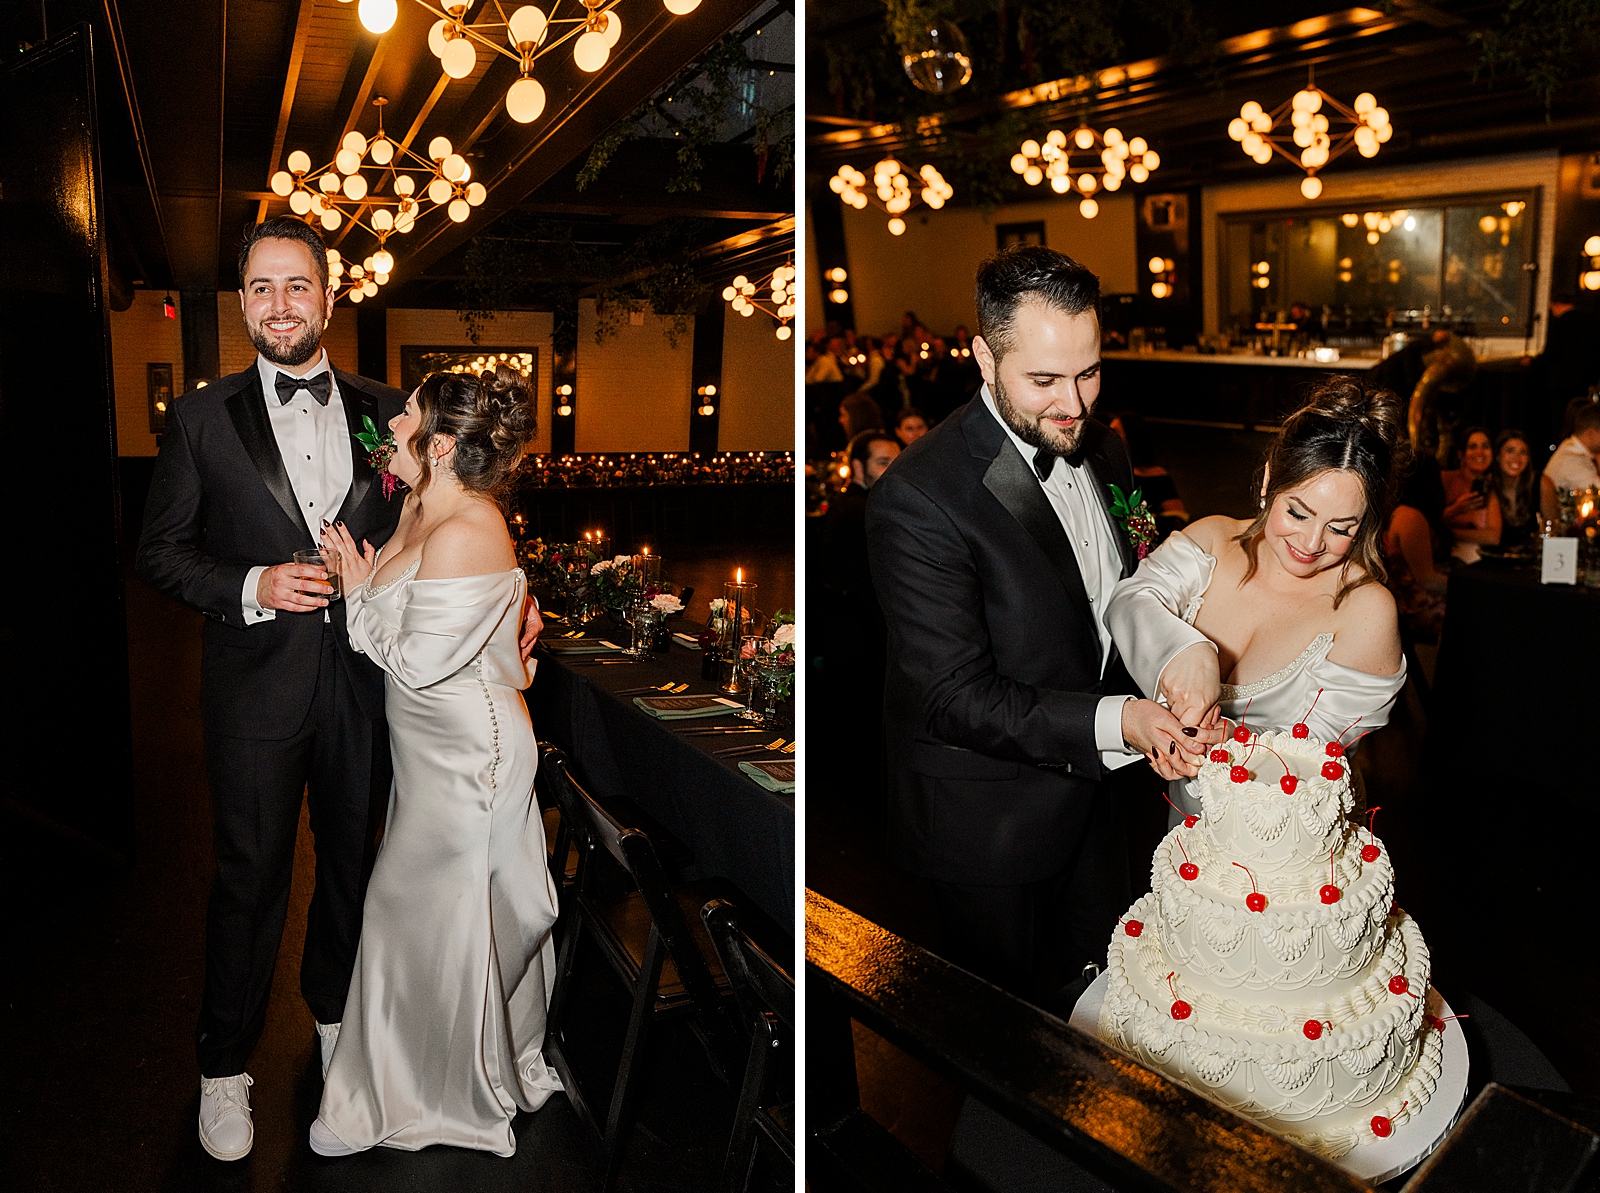 Left photo: Shot of the Bride and Groom sporting big smiles as they embrace during their reception. 
Right photo: Close up shot of the couple cutting their wedding cake. 